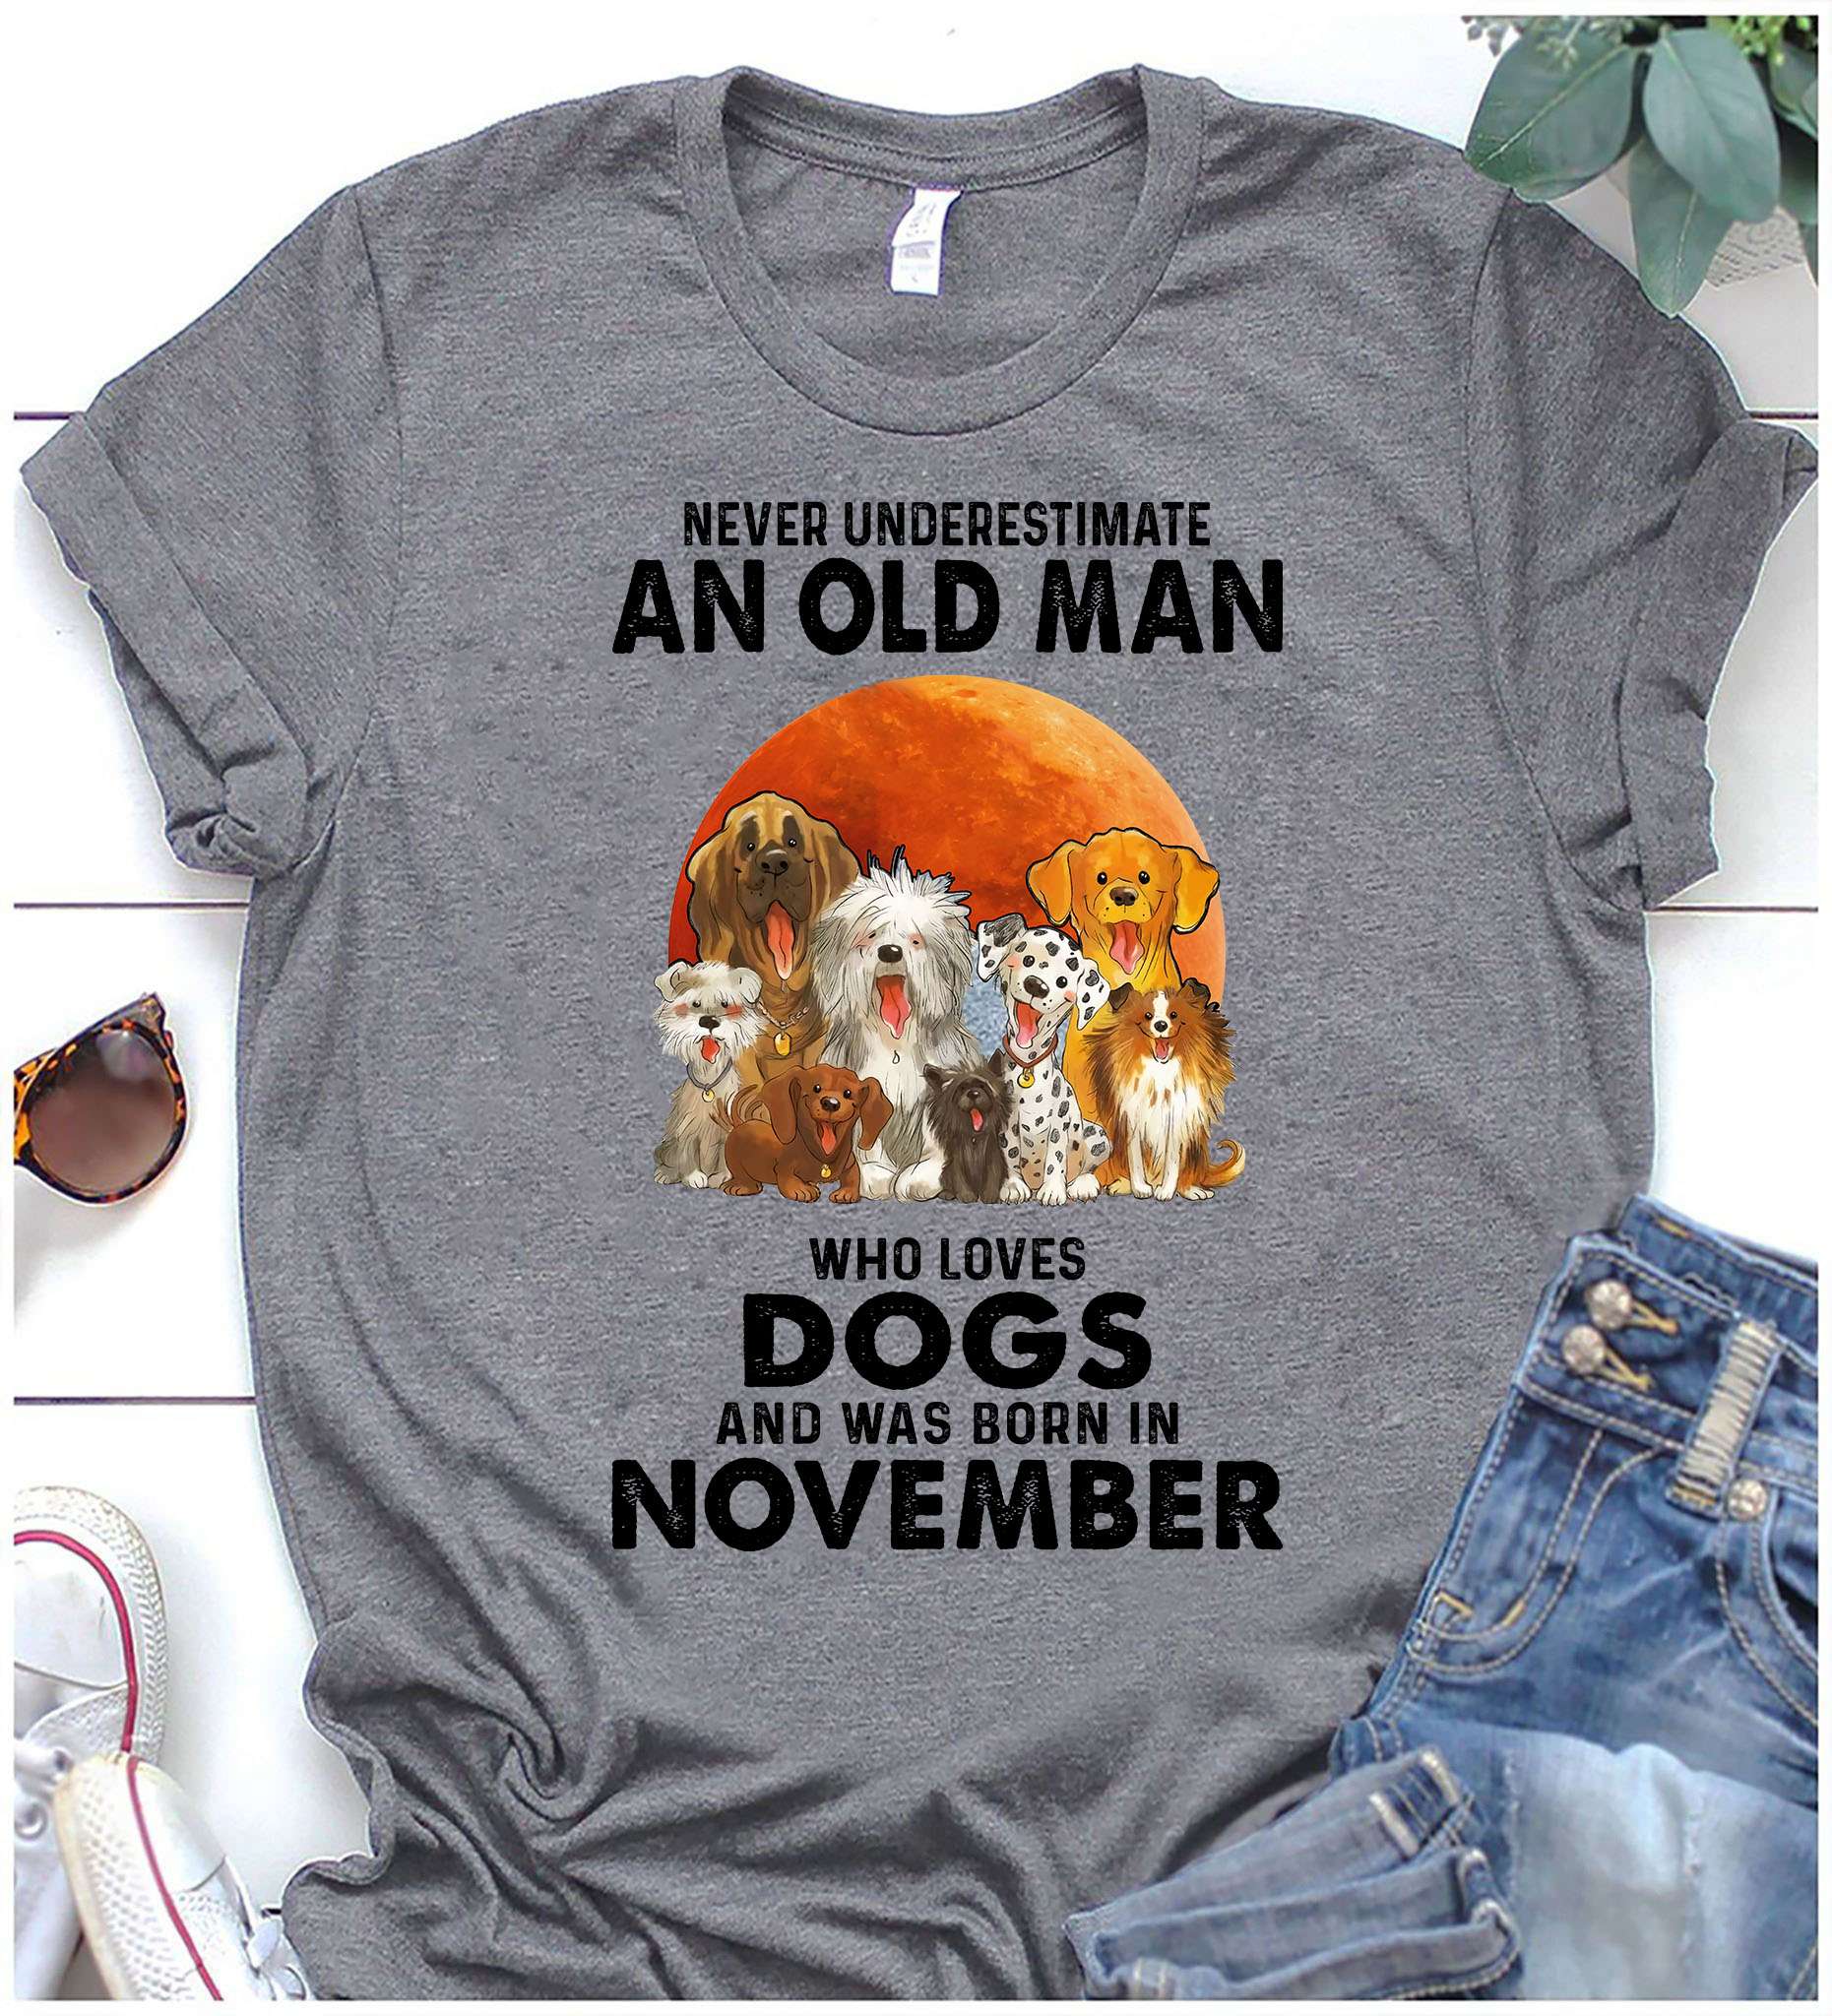 Never underestimate an old man who loves dogs and was born in November